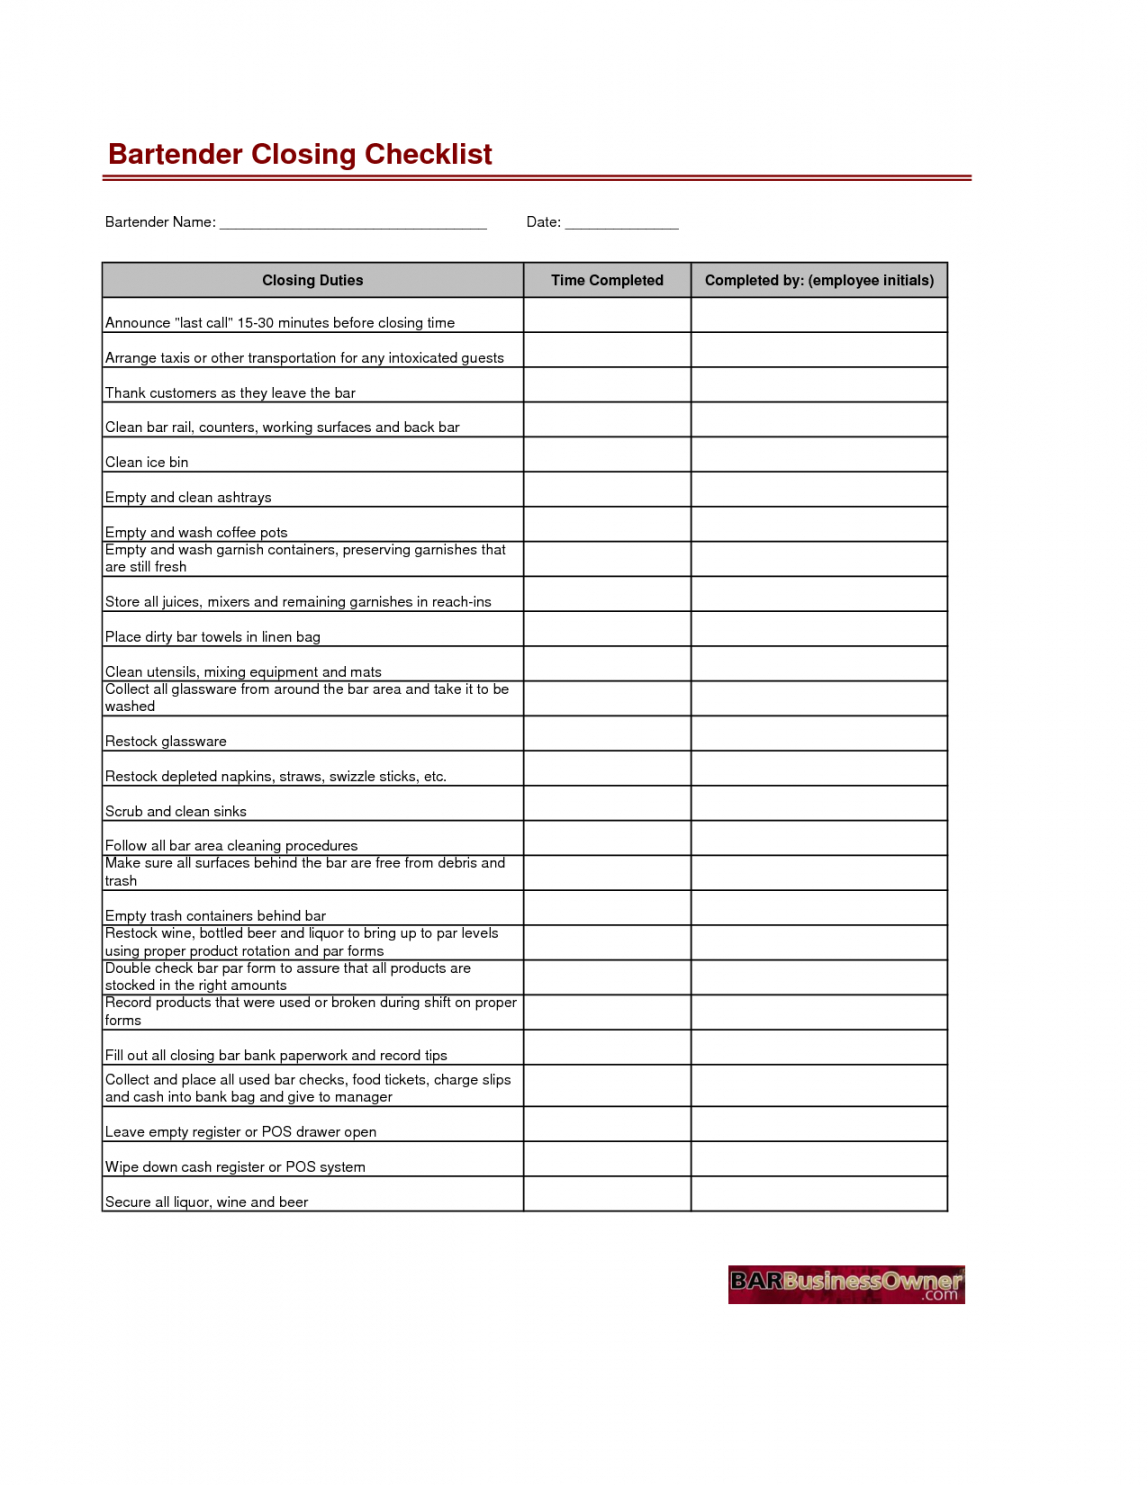 duty checklist templates  google search  workin' on it shift checklist template examples